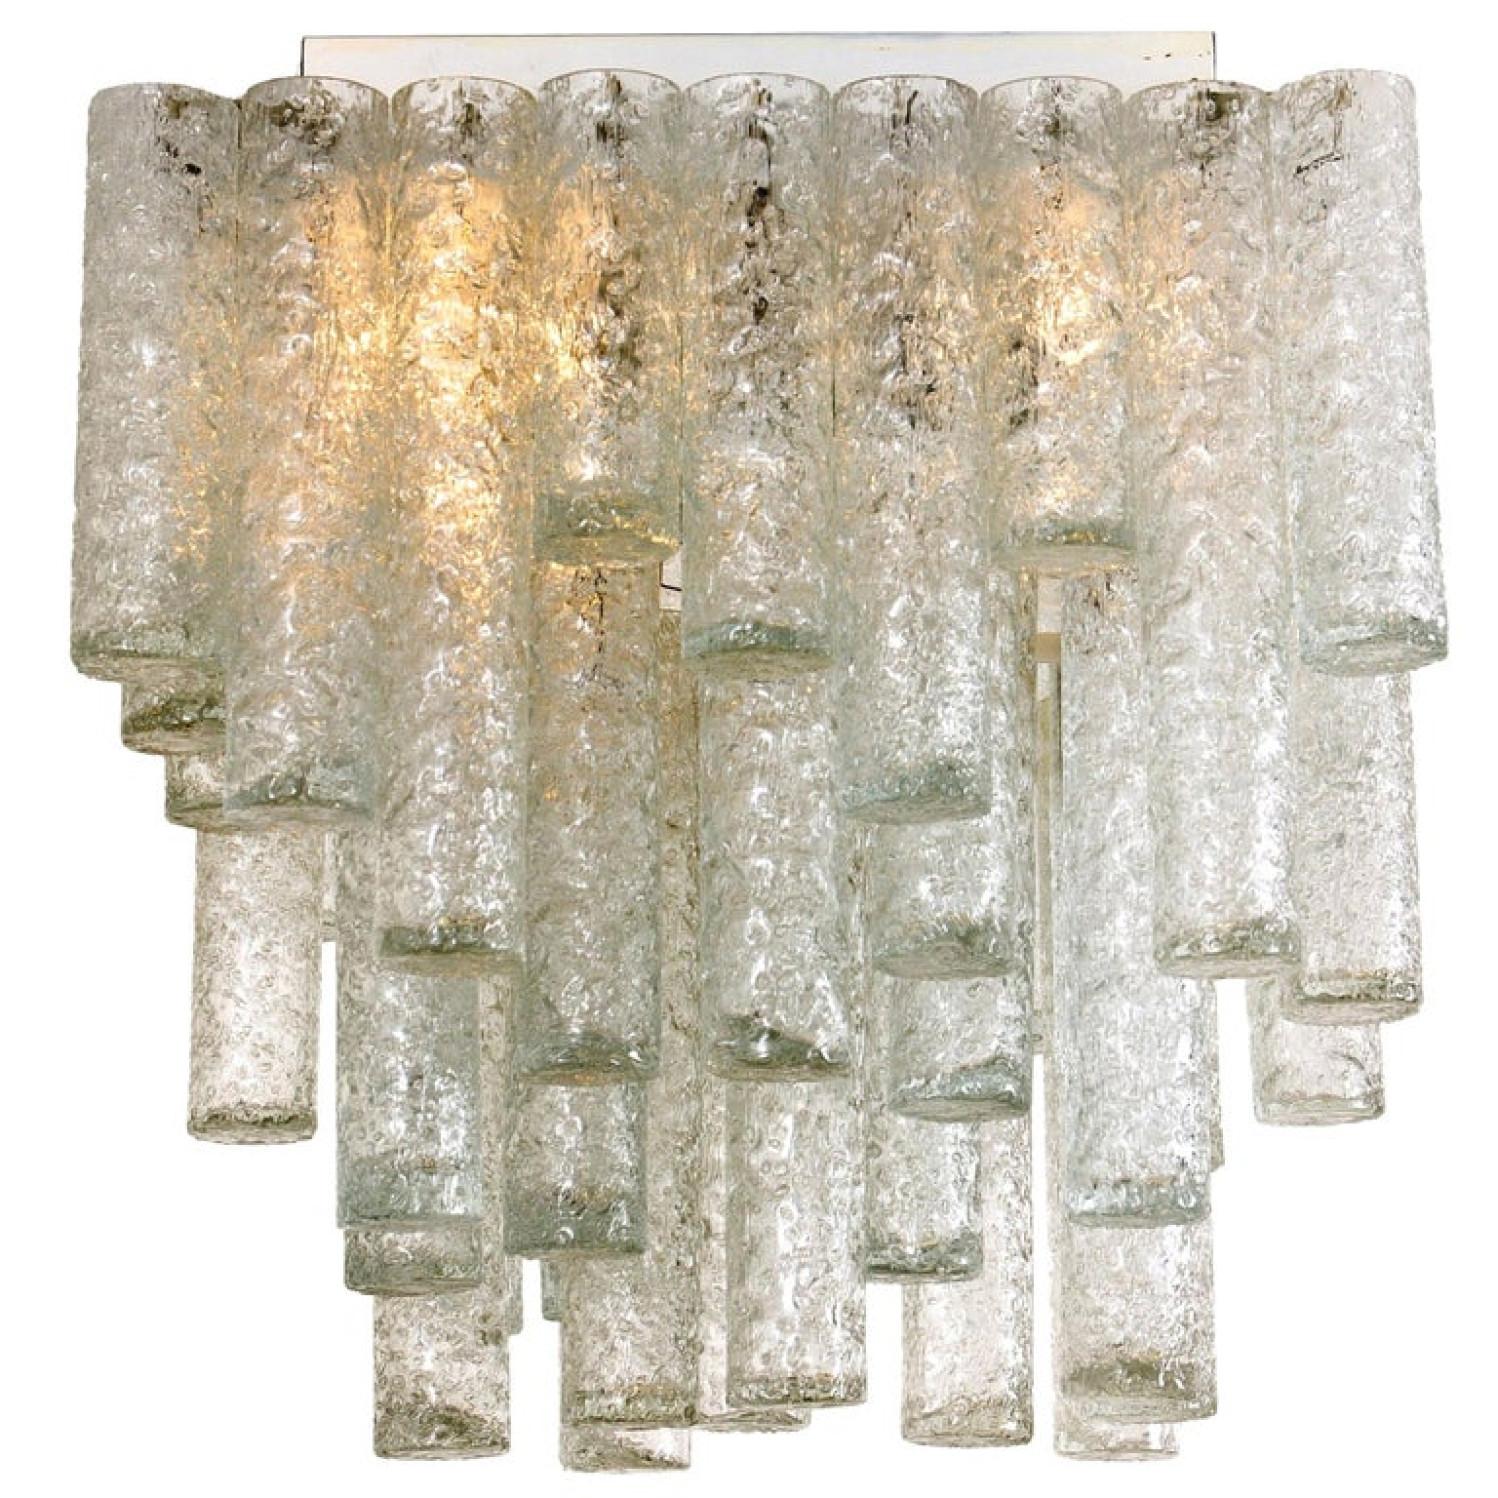 This beautiful square flushmount was manufactured by Doria in Germany in the 1960s. It consists of 47 organic glass tubes of different lengths.
This square flushmount is very unique and rare to find. The chandelier is in excellent vintage